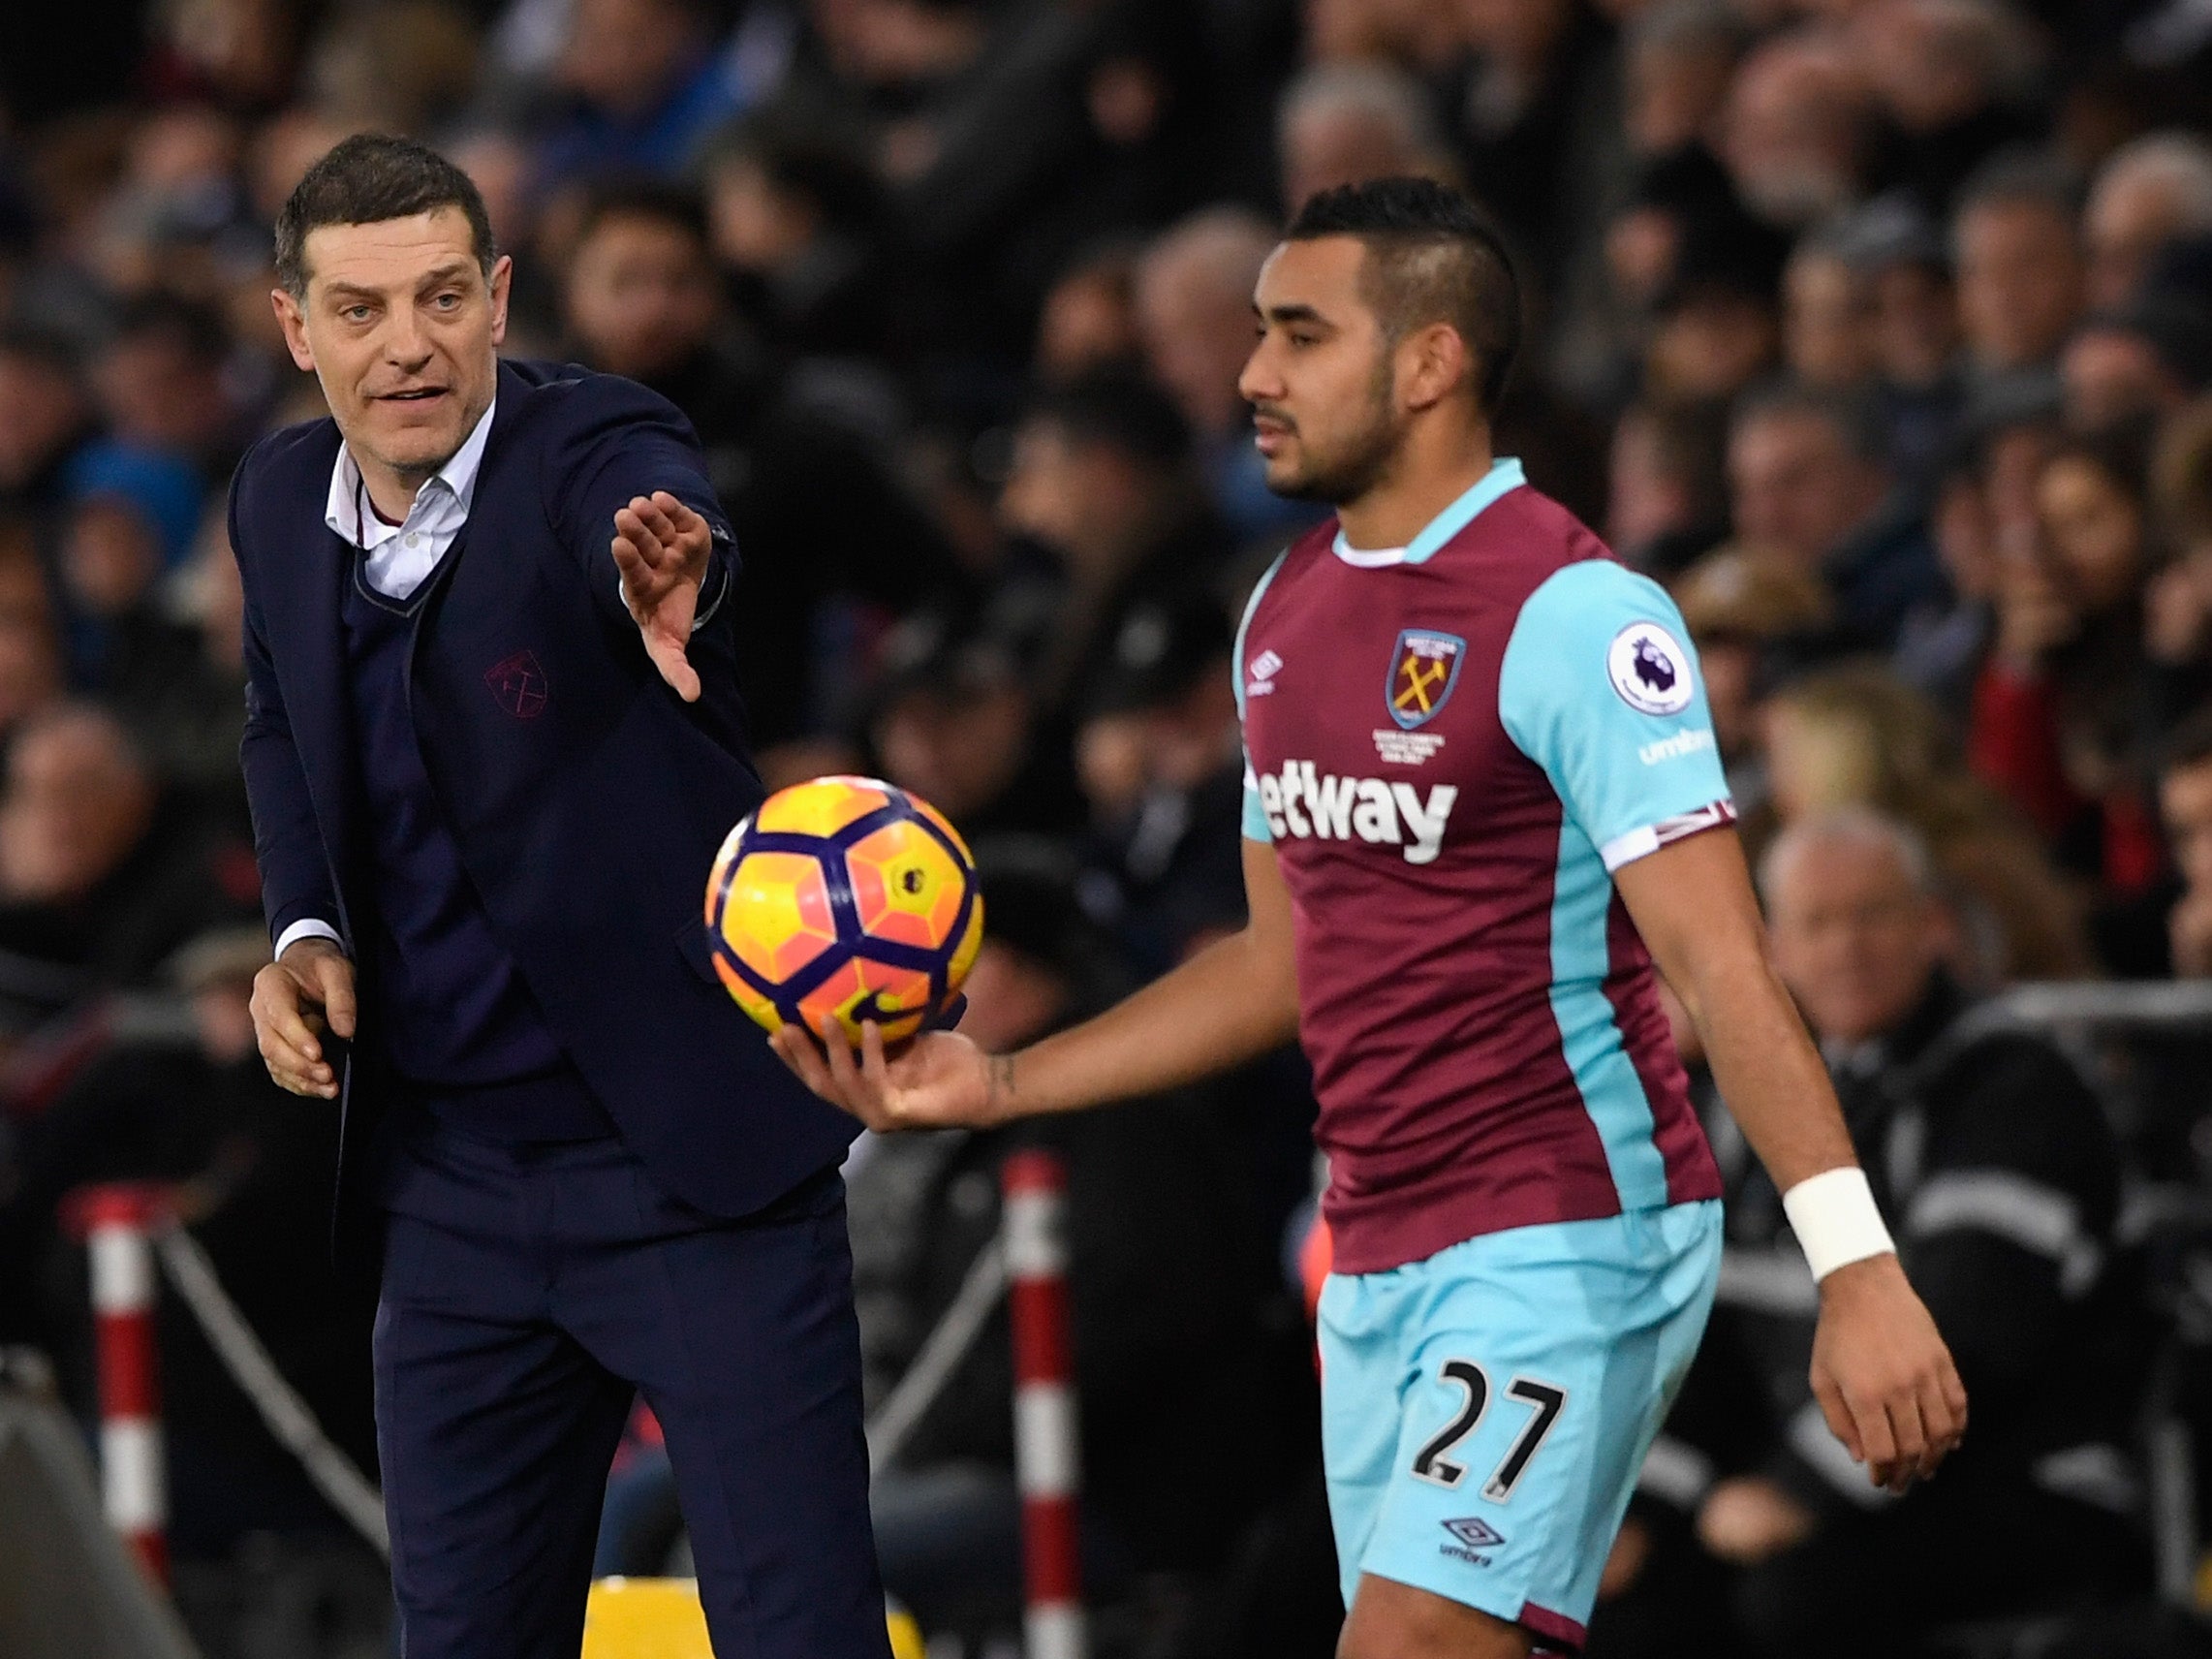 Dimitri Payet says Slaven Bilic helped him settle quickly in England